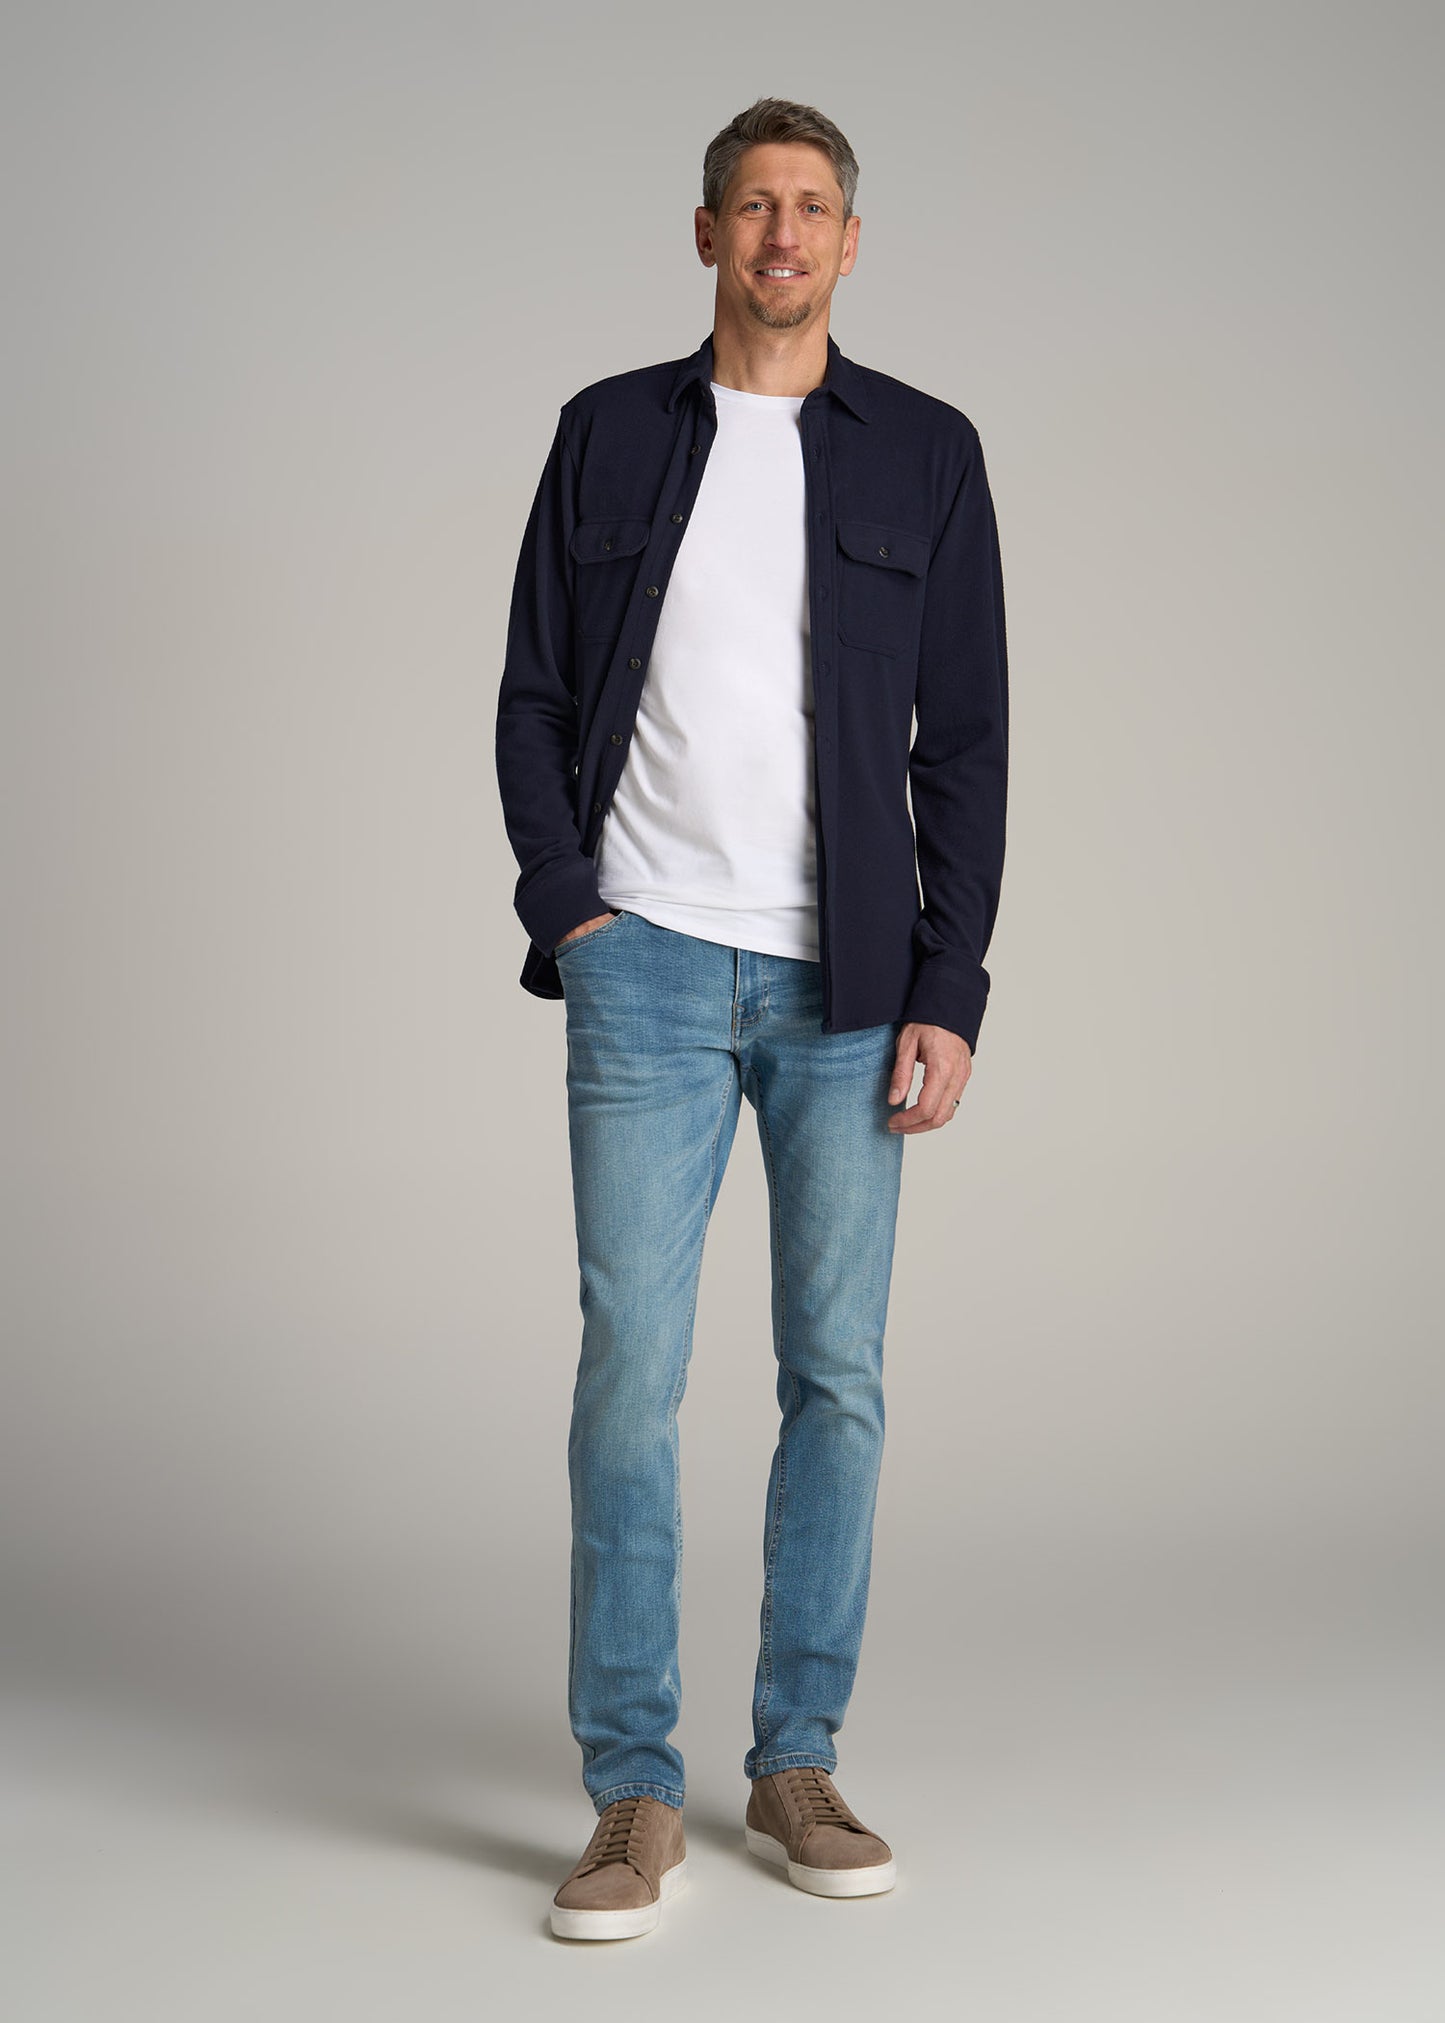 Carman Tapered Jeans For Tall Men New Fade